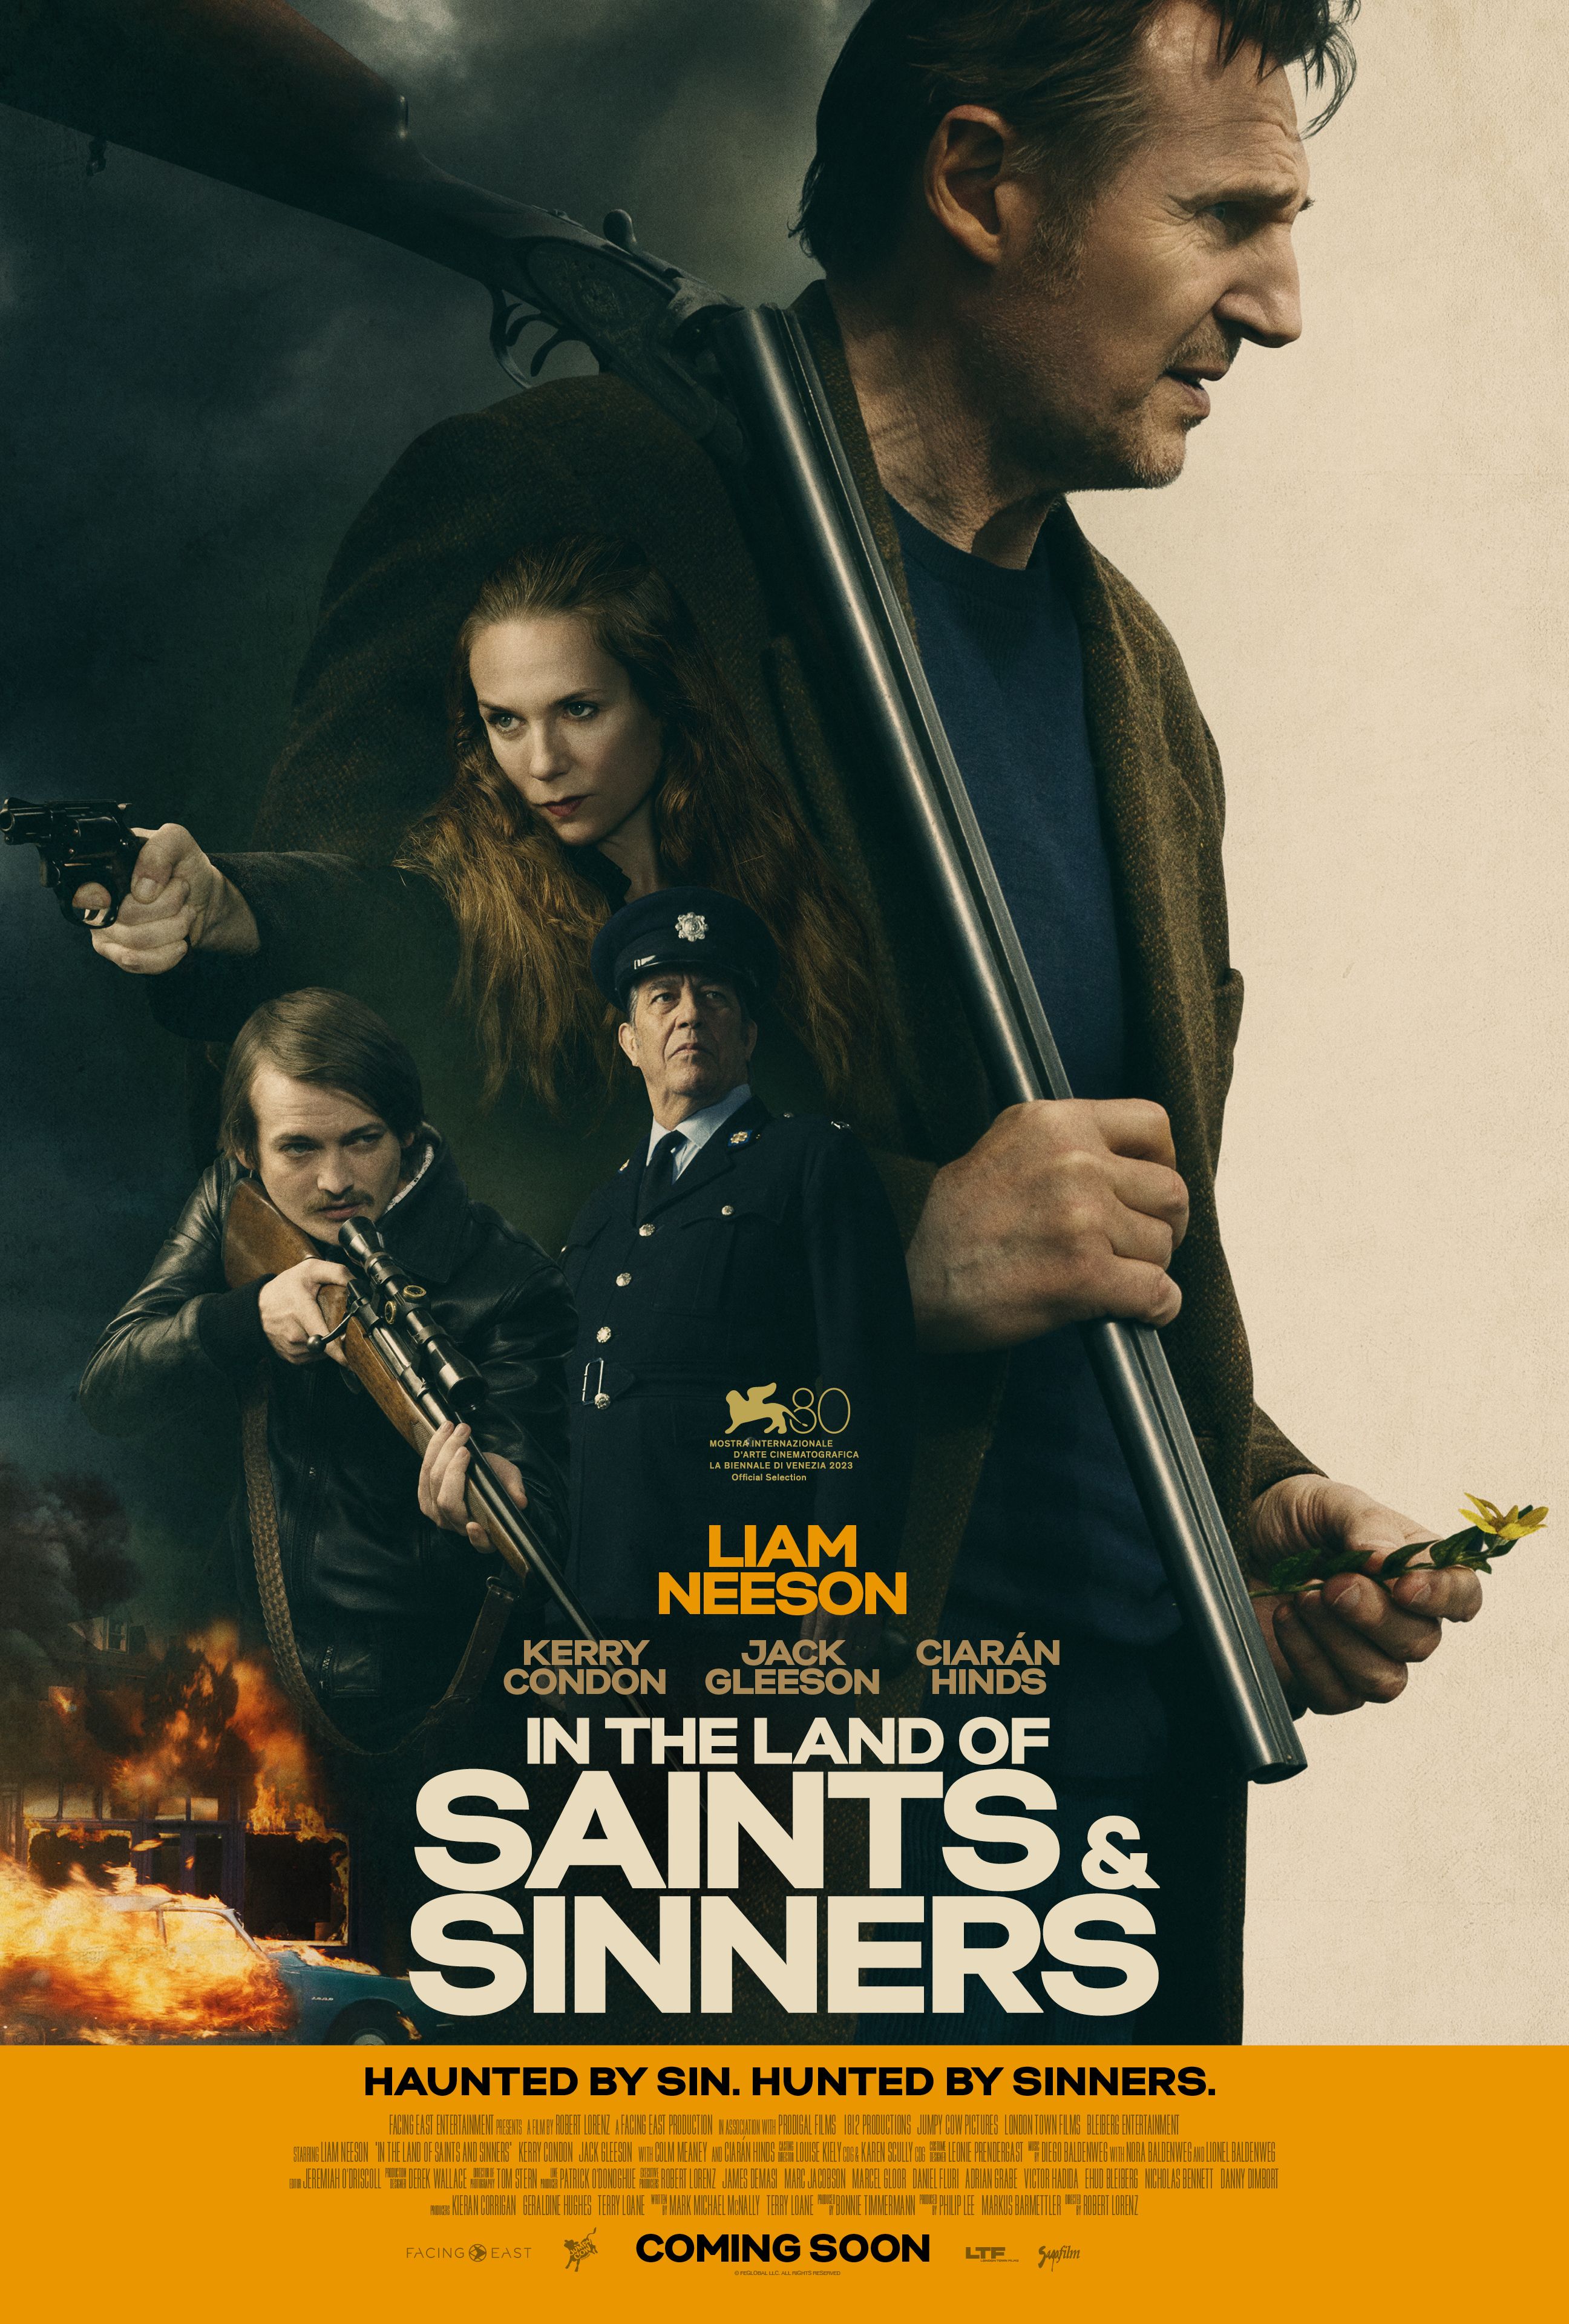 The In the Land of Saints and Sinners poster